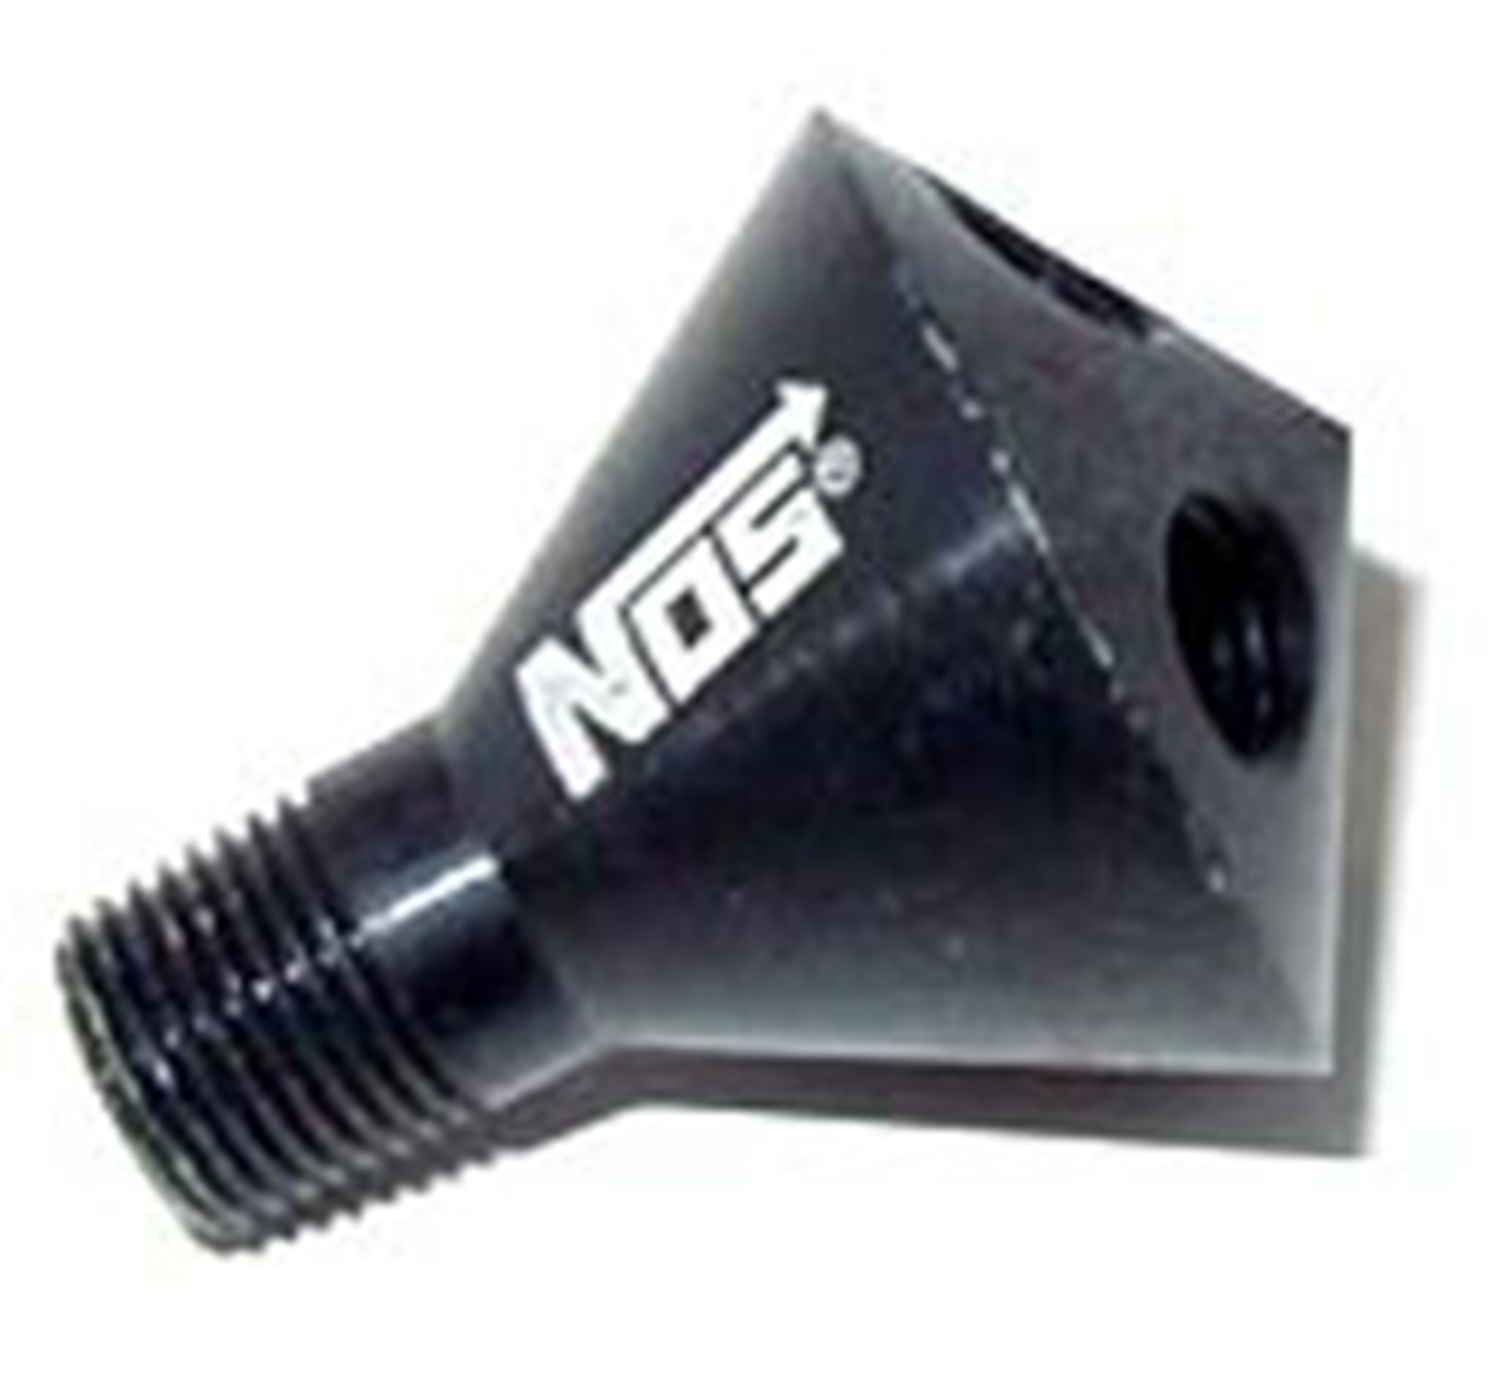 Nitrous Oxide Distribution Block, NOS Distribution Blocks, 1 IN 4 OUT 1/16in. STAINLESS SHOWERHEAD